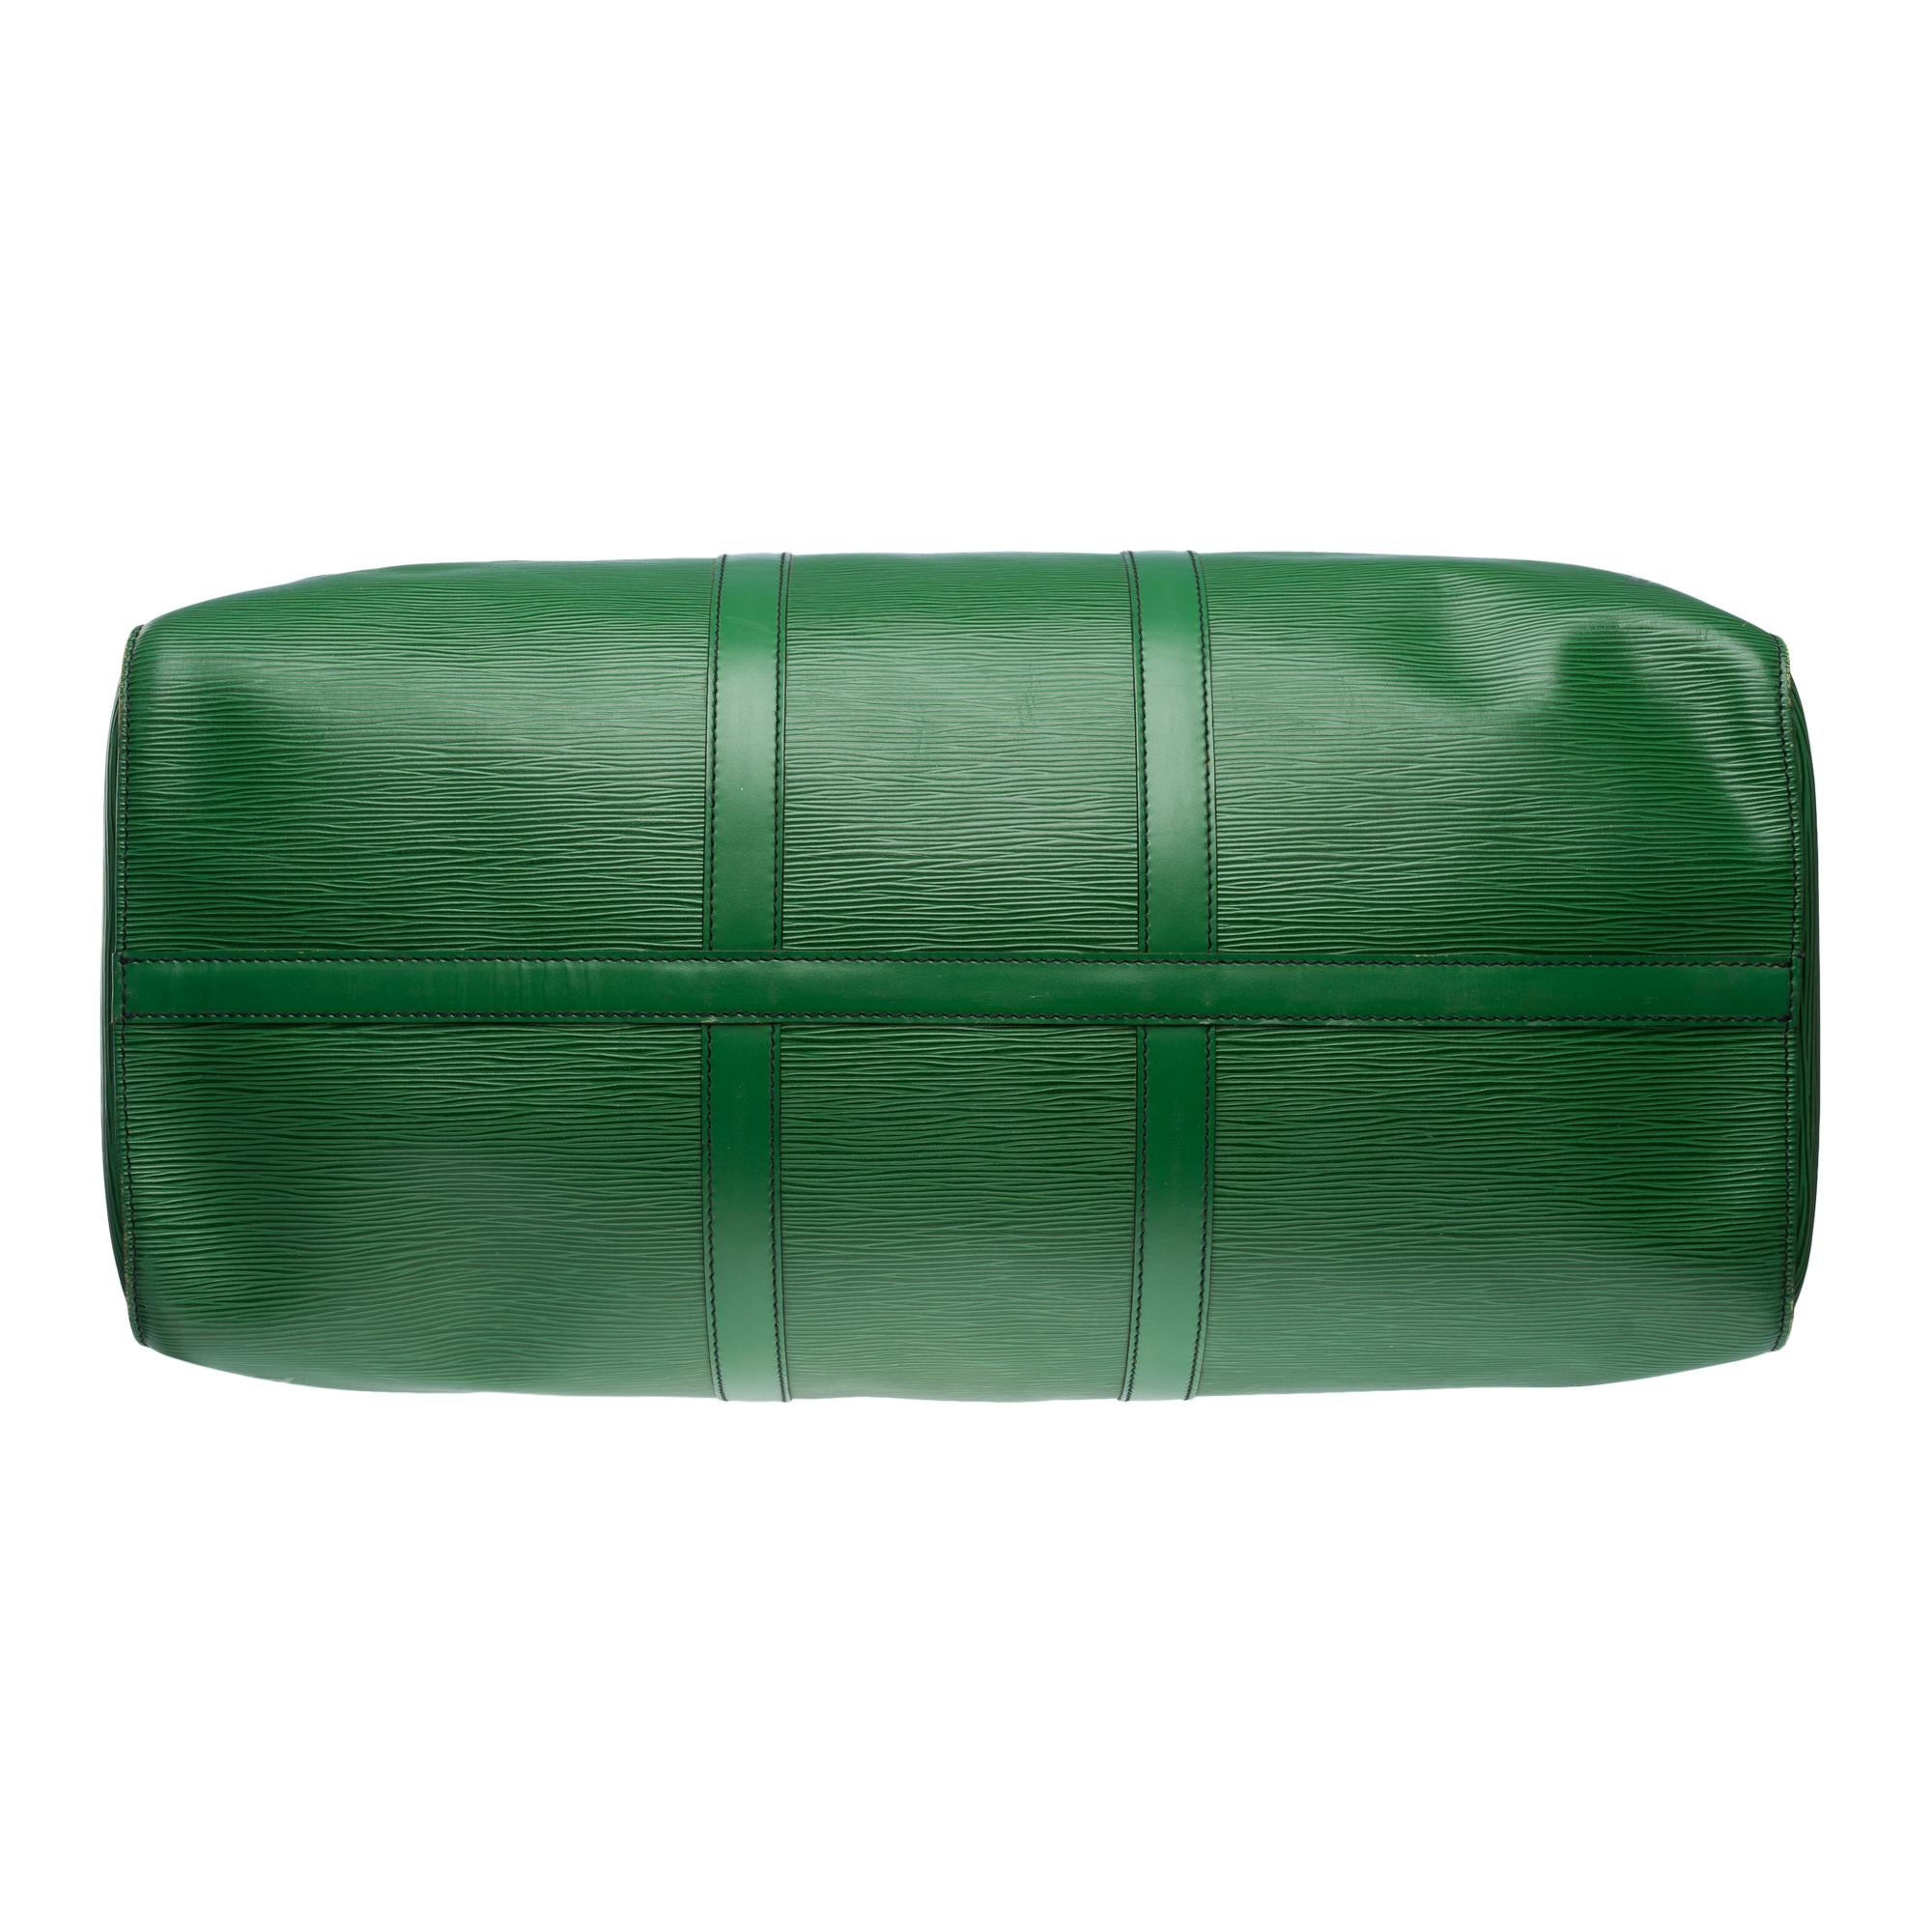 Louis Vuitton Keepall 50 Travel bag in Green épi leather, GHW For Sale 6